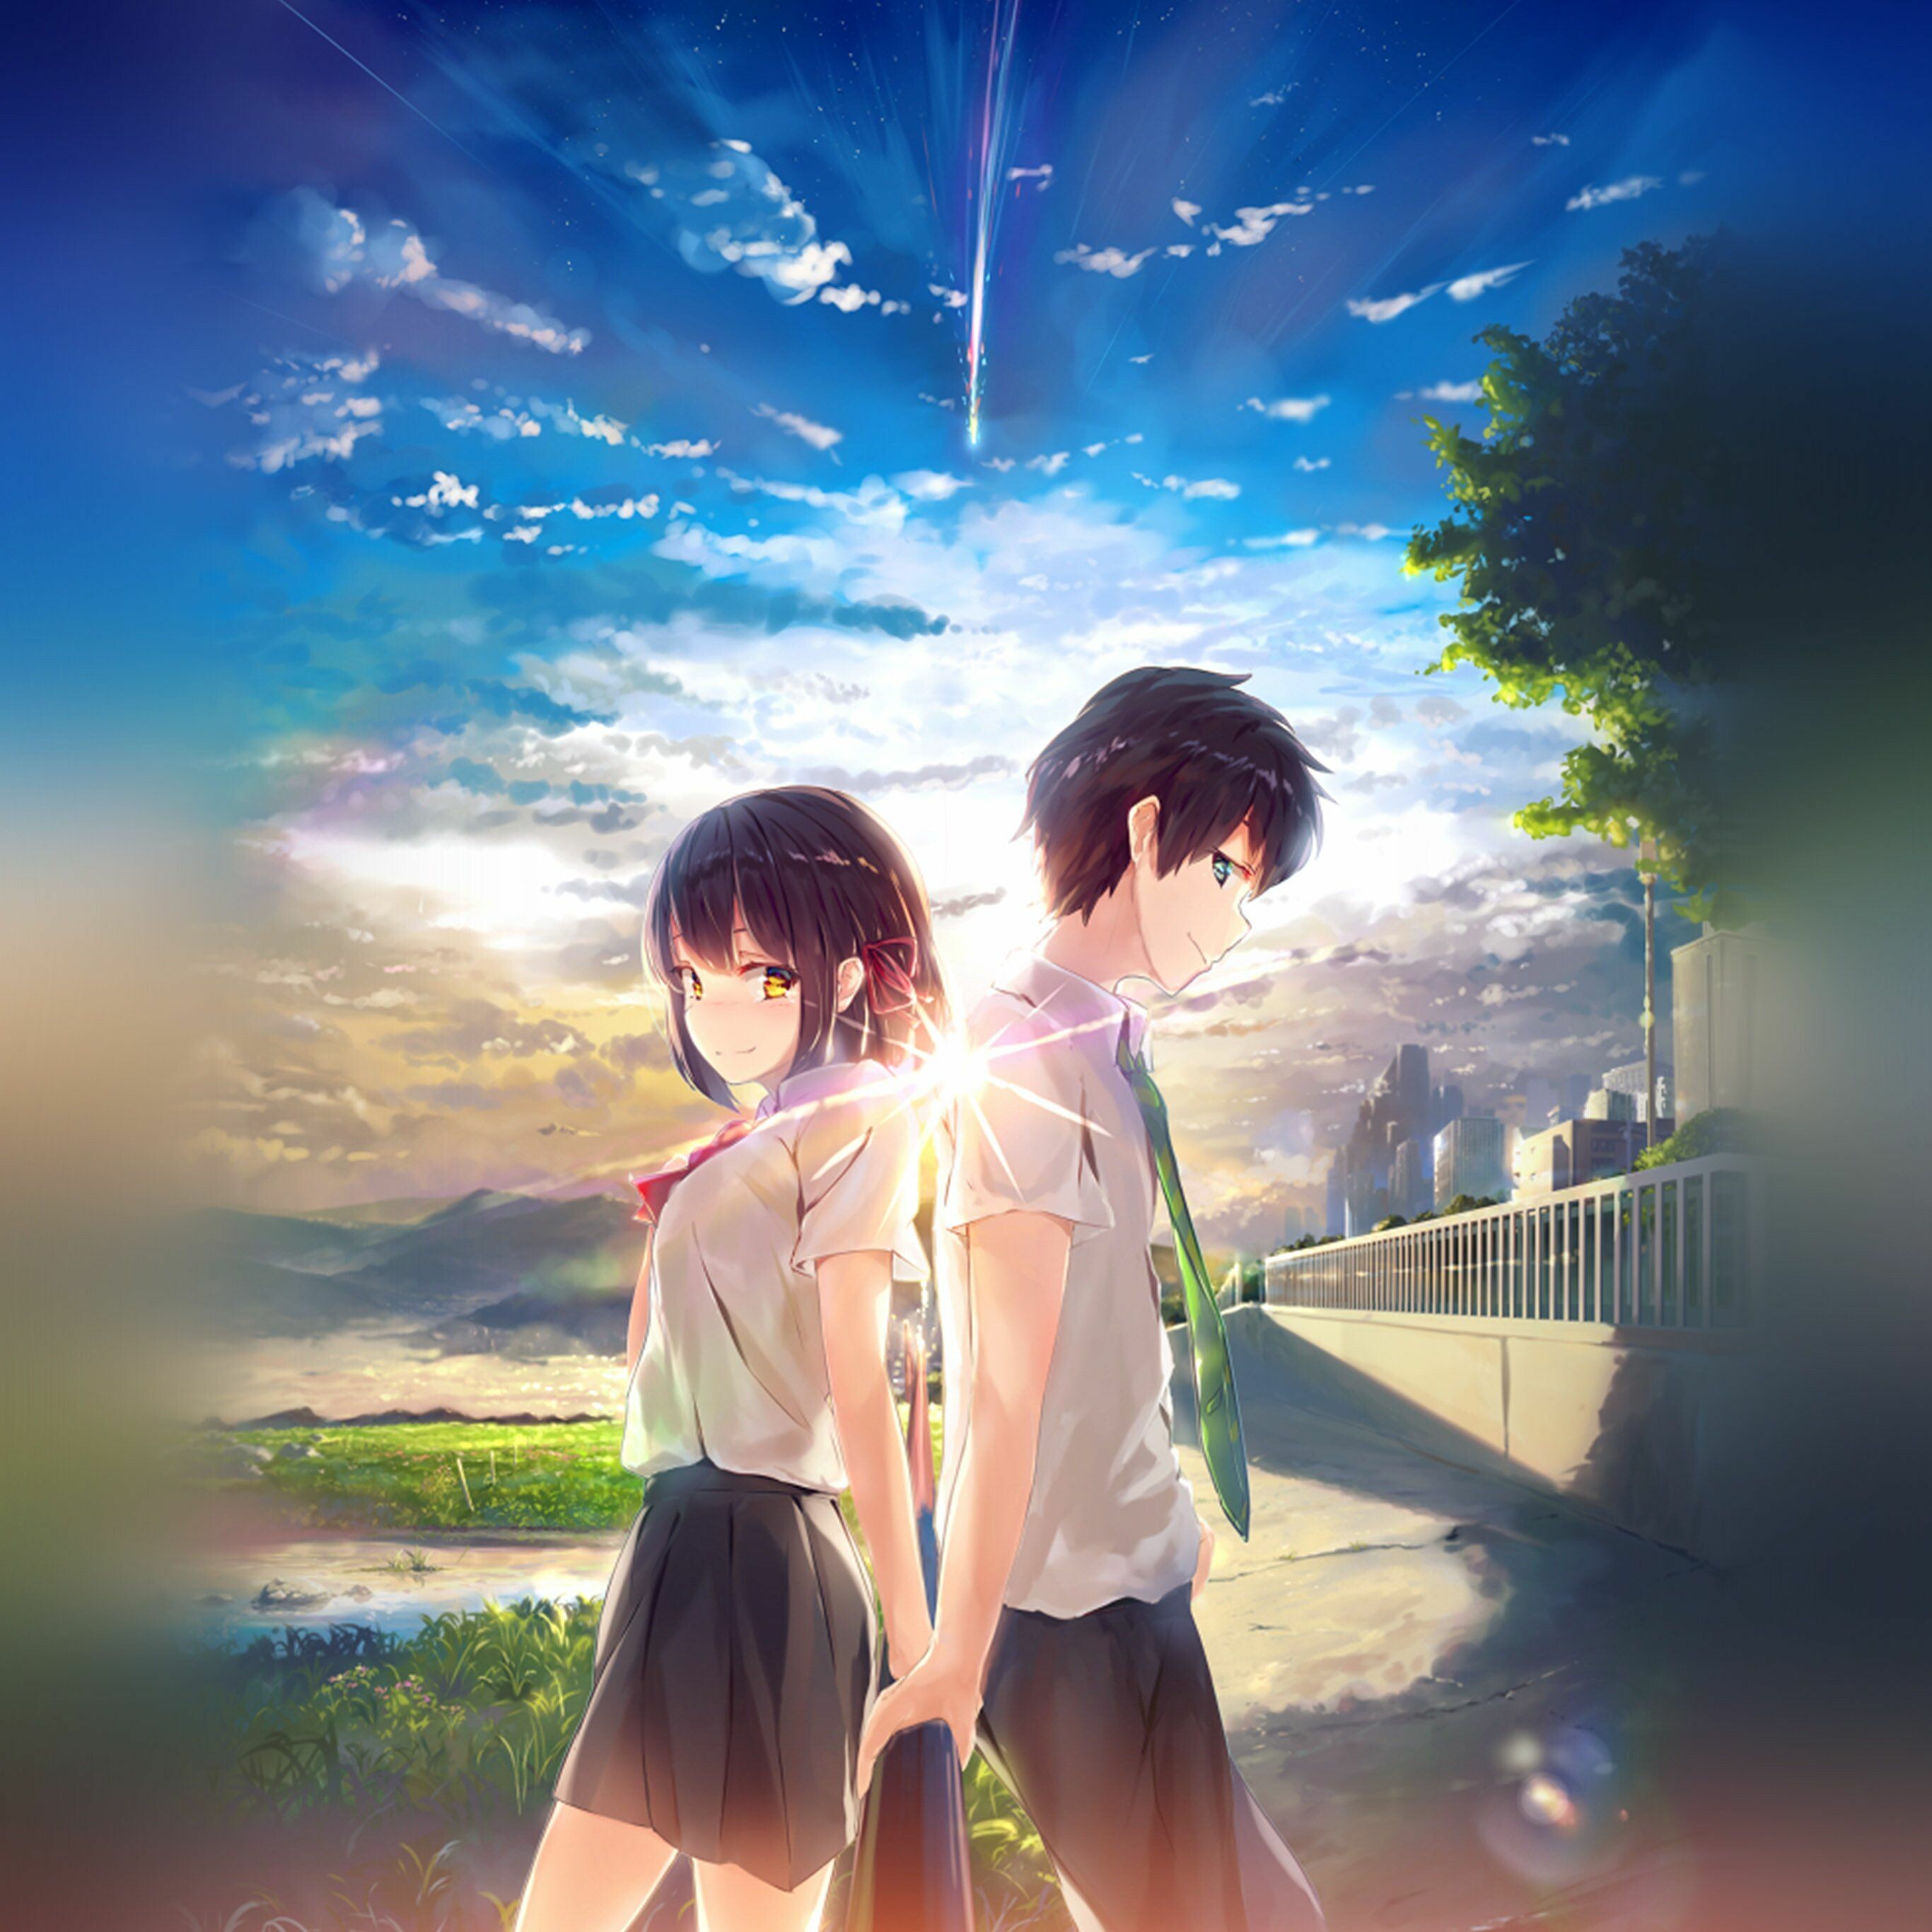 50+ Your Name Anime Wallpapers: HD, 4K, 5K for PC and Mobile | Download  free images for iPhone, Android